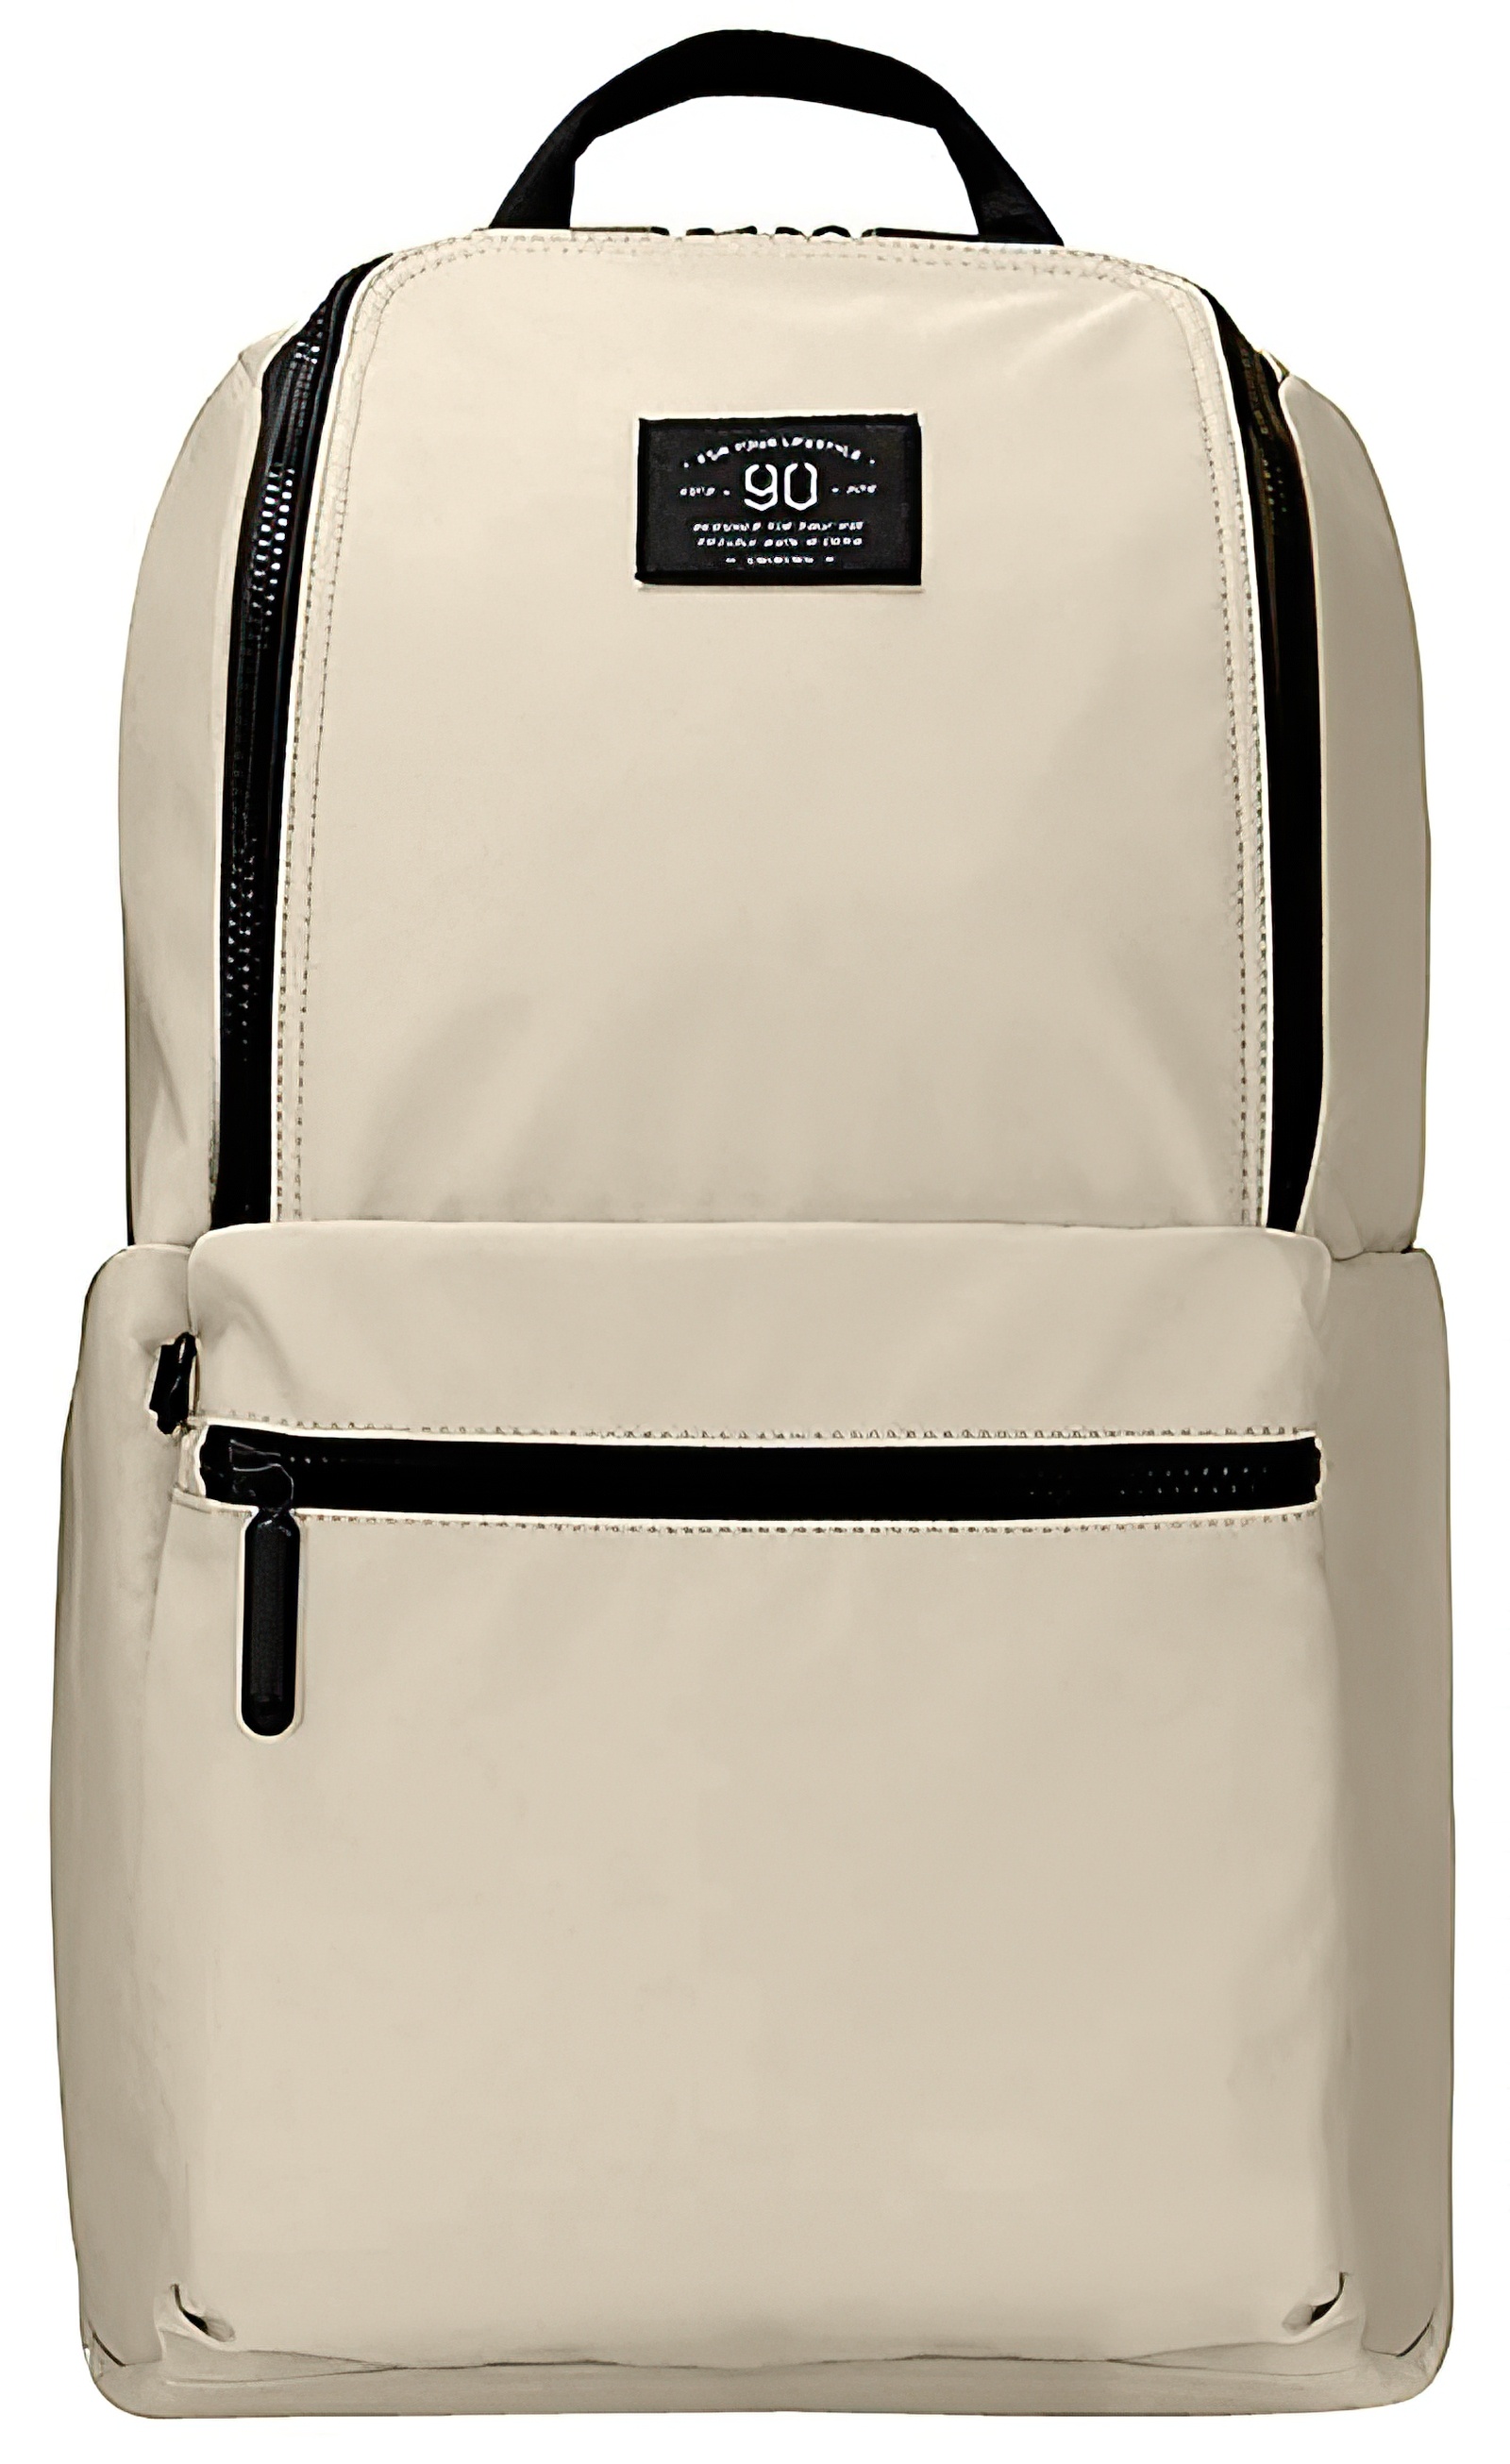 Xiaomi 90 Points Pro Leisure Travel Backpack 10L Beige КАРКАМ - фото 1